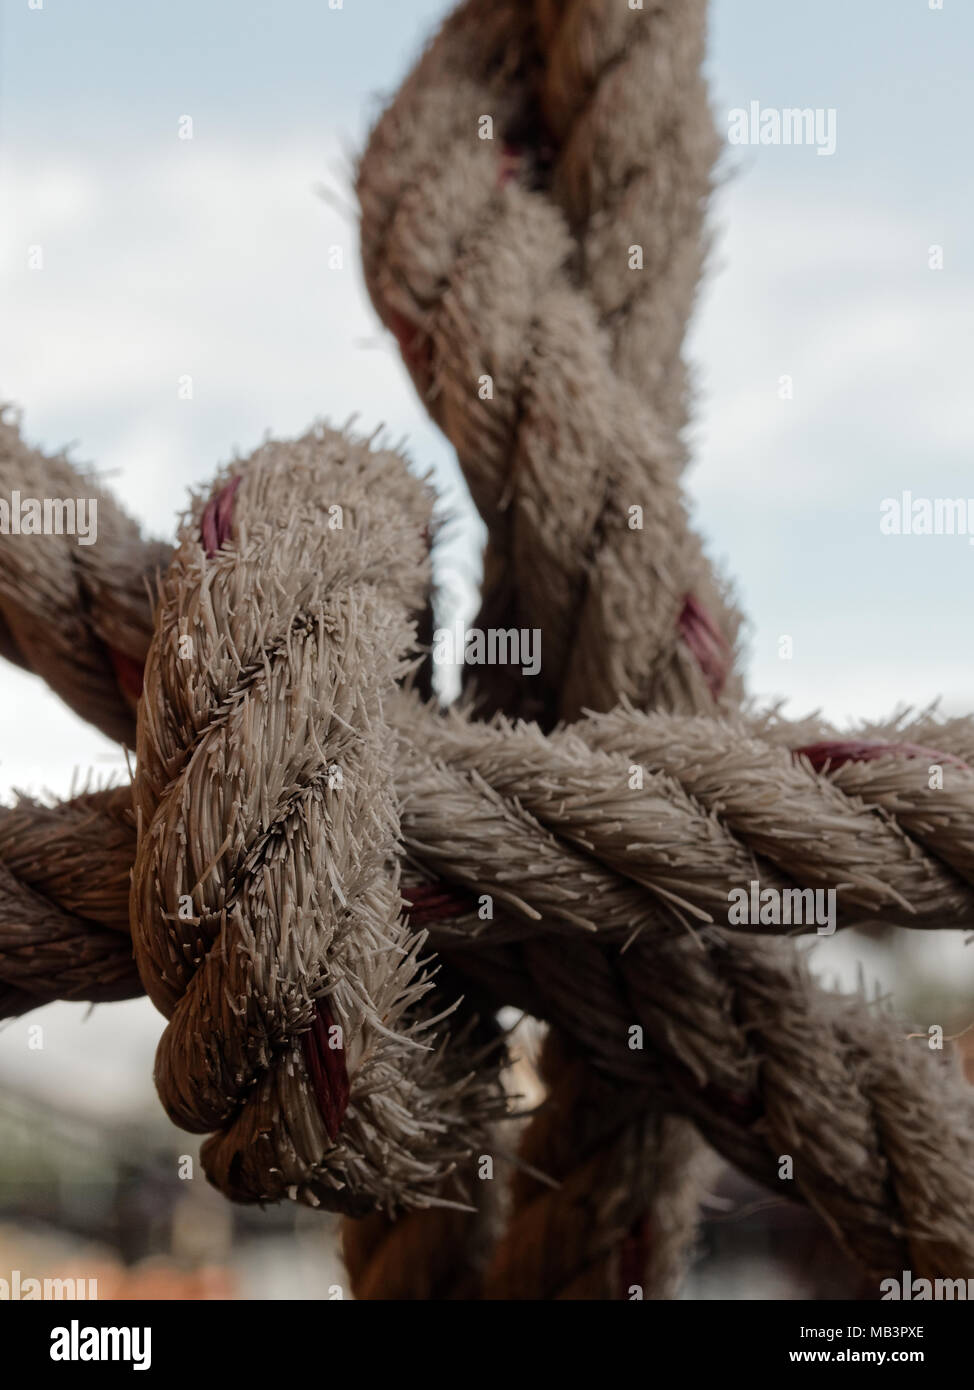 Hemp rope tied together on steel raft in net shape to prevent someone falling into water over rural area background Stock Photo